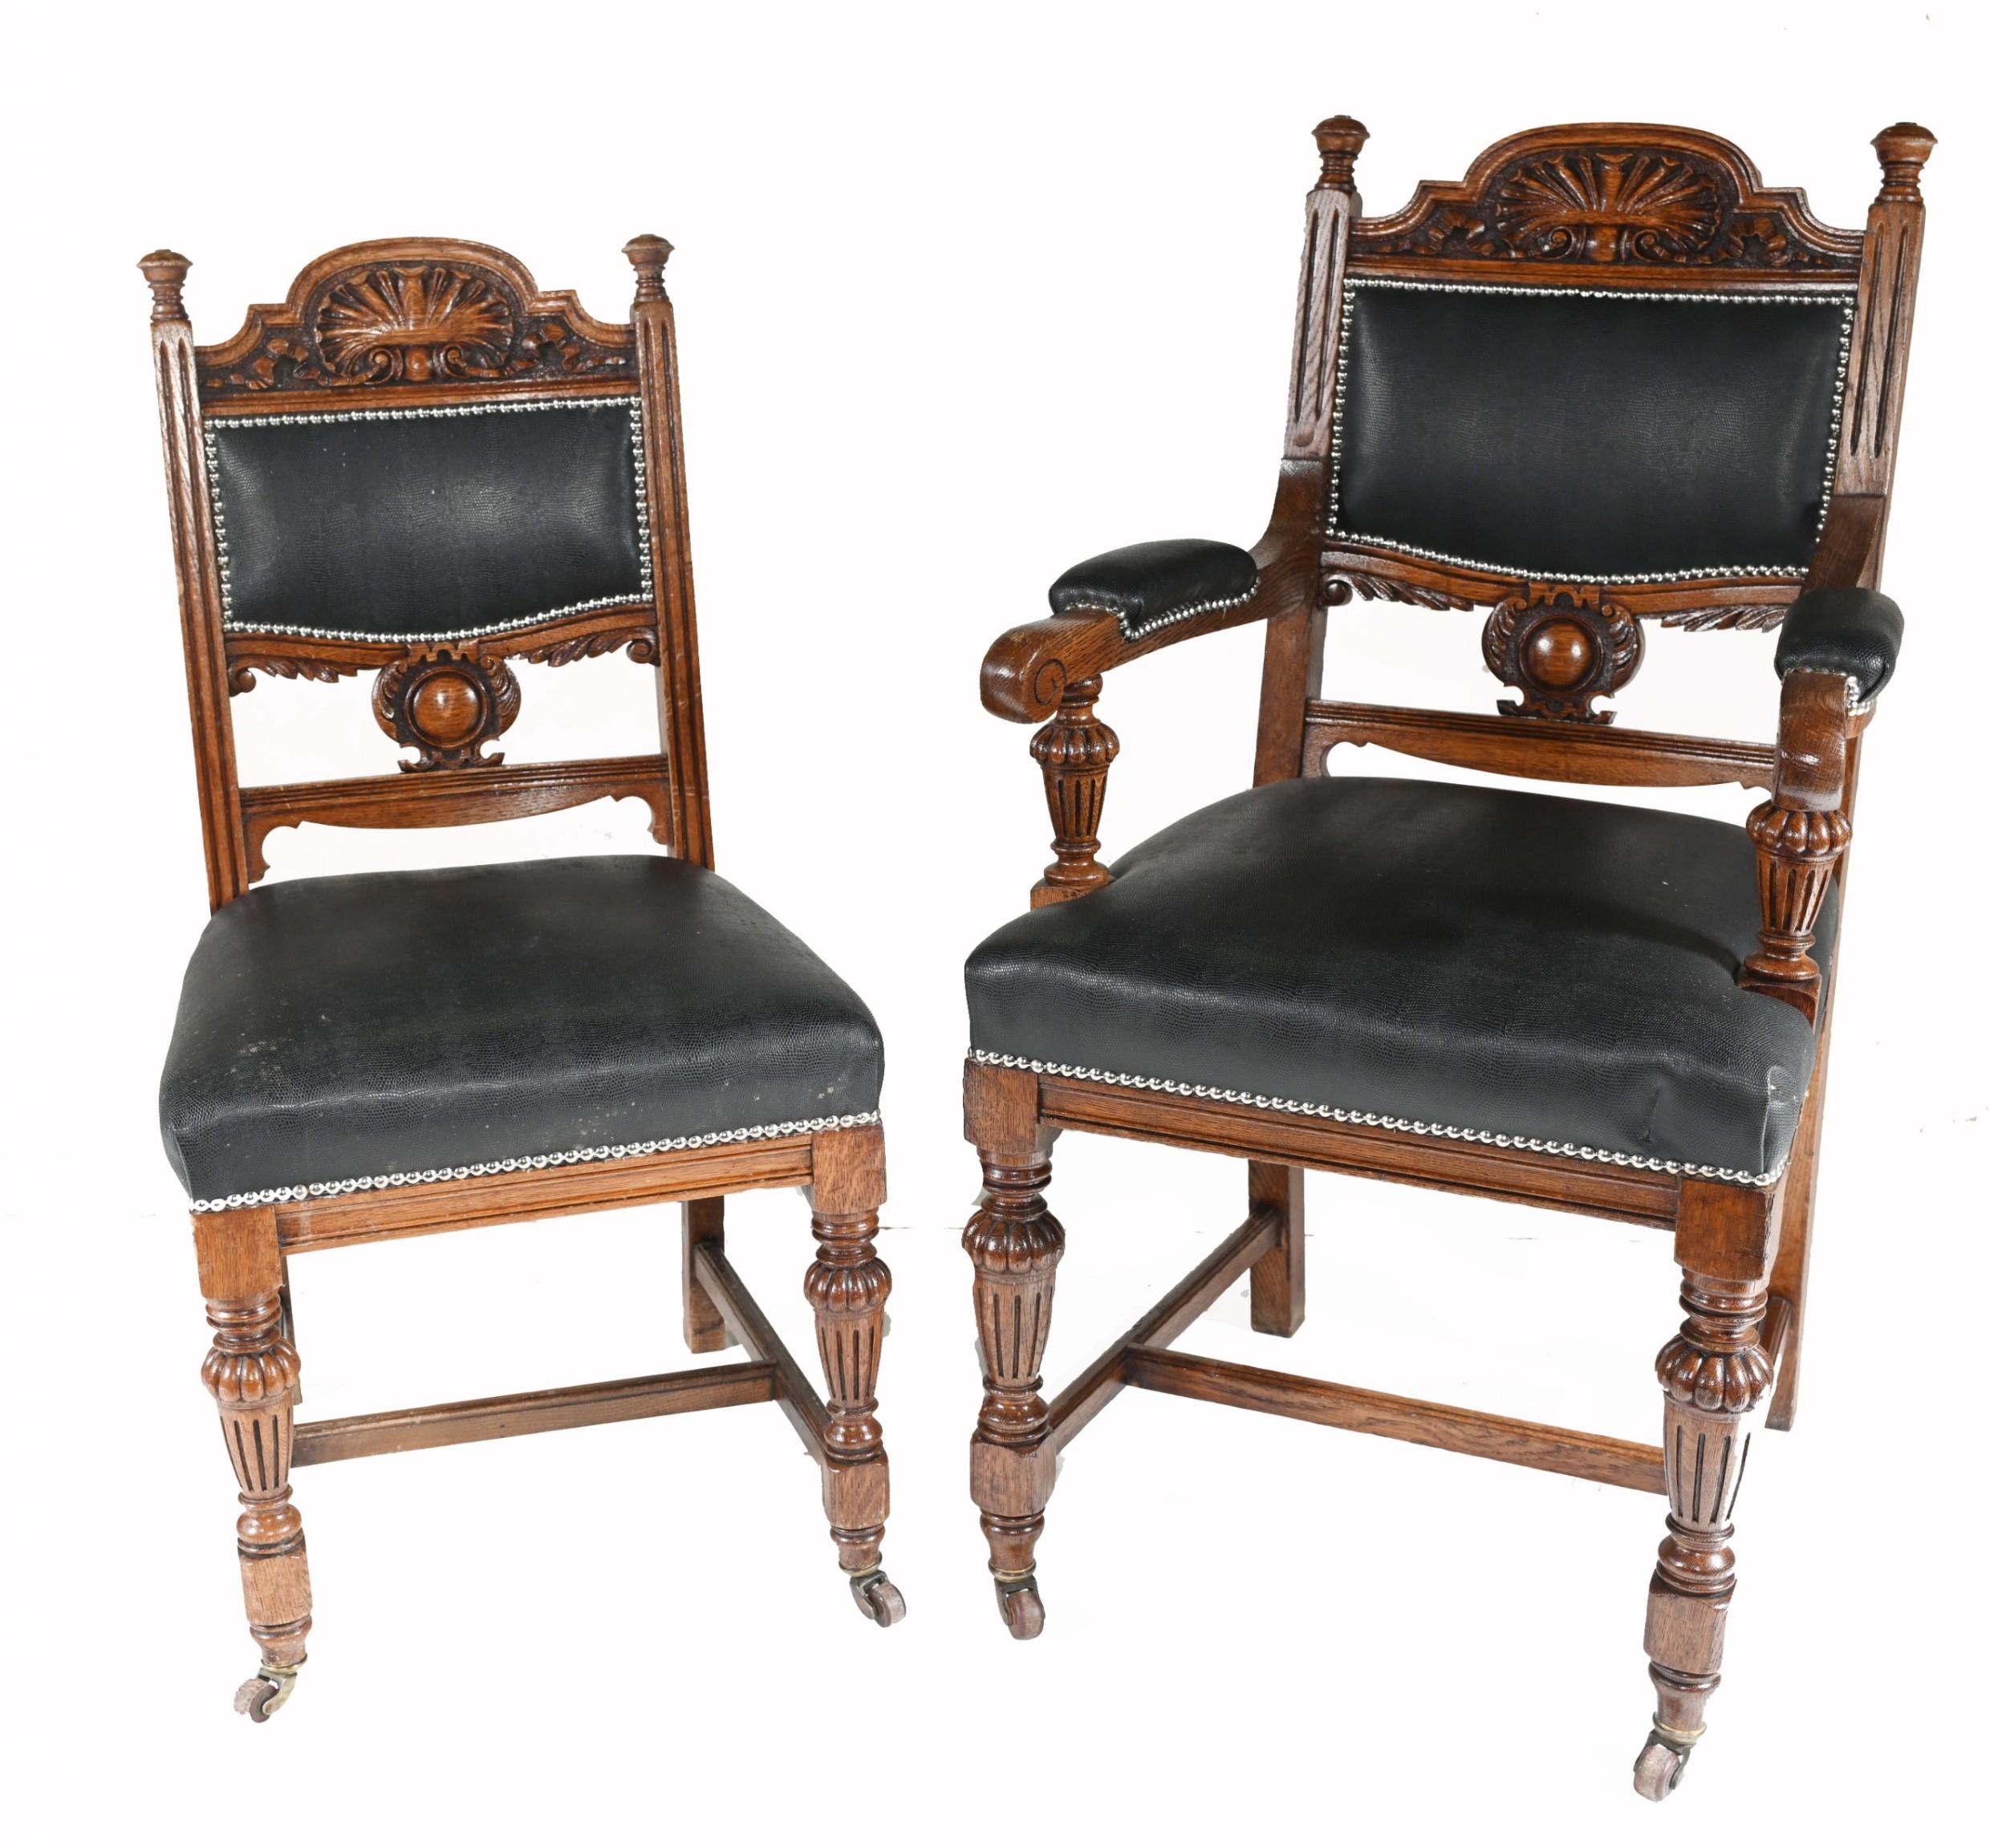 Glorious set of 8 antique farmhouse dining chairs
Set consists of 6 side chairs and 6 side chairs
Very comfortable to sit in with cushioned seats
Lots of hand carved details
We have various refectory tables to match.
Some of our items are in